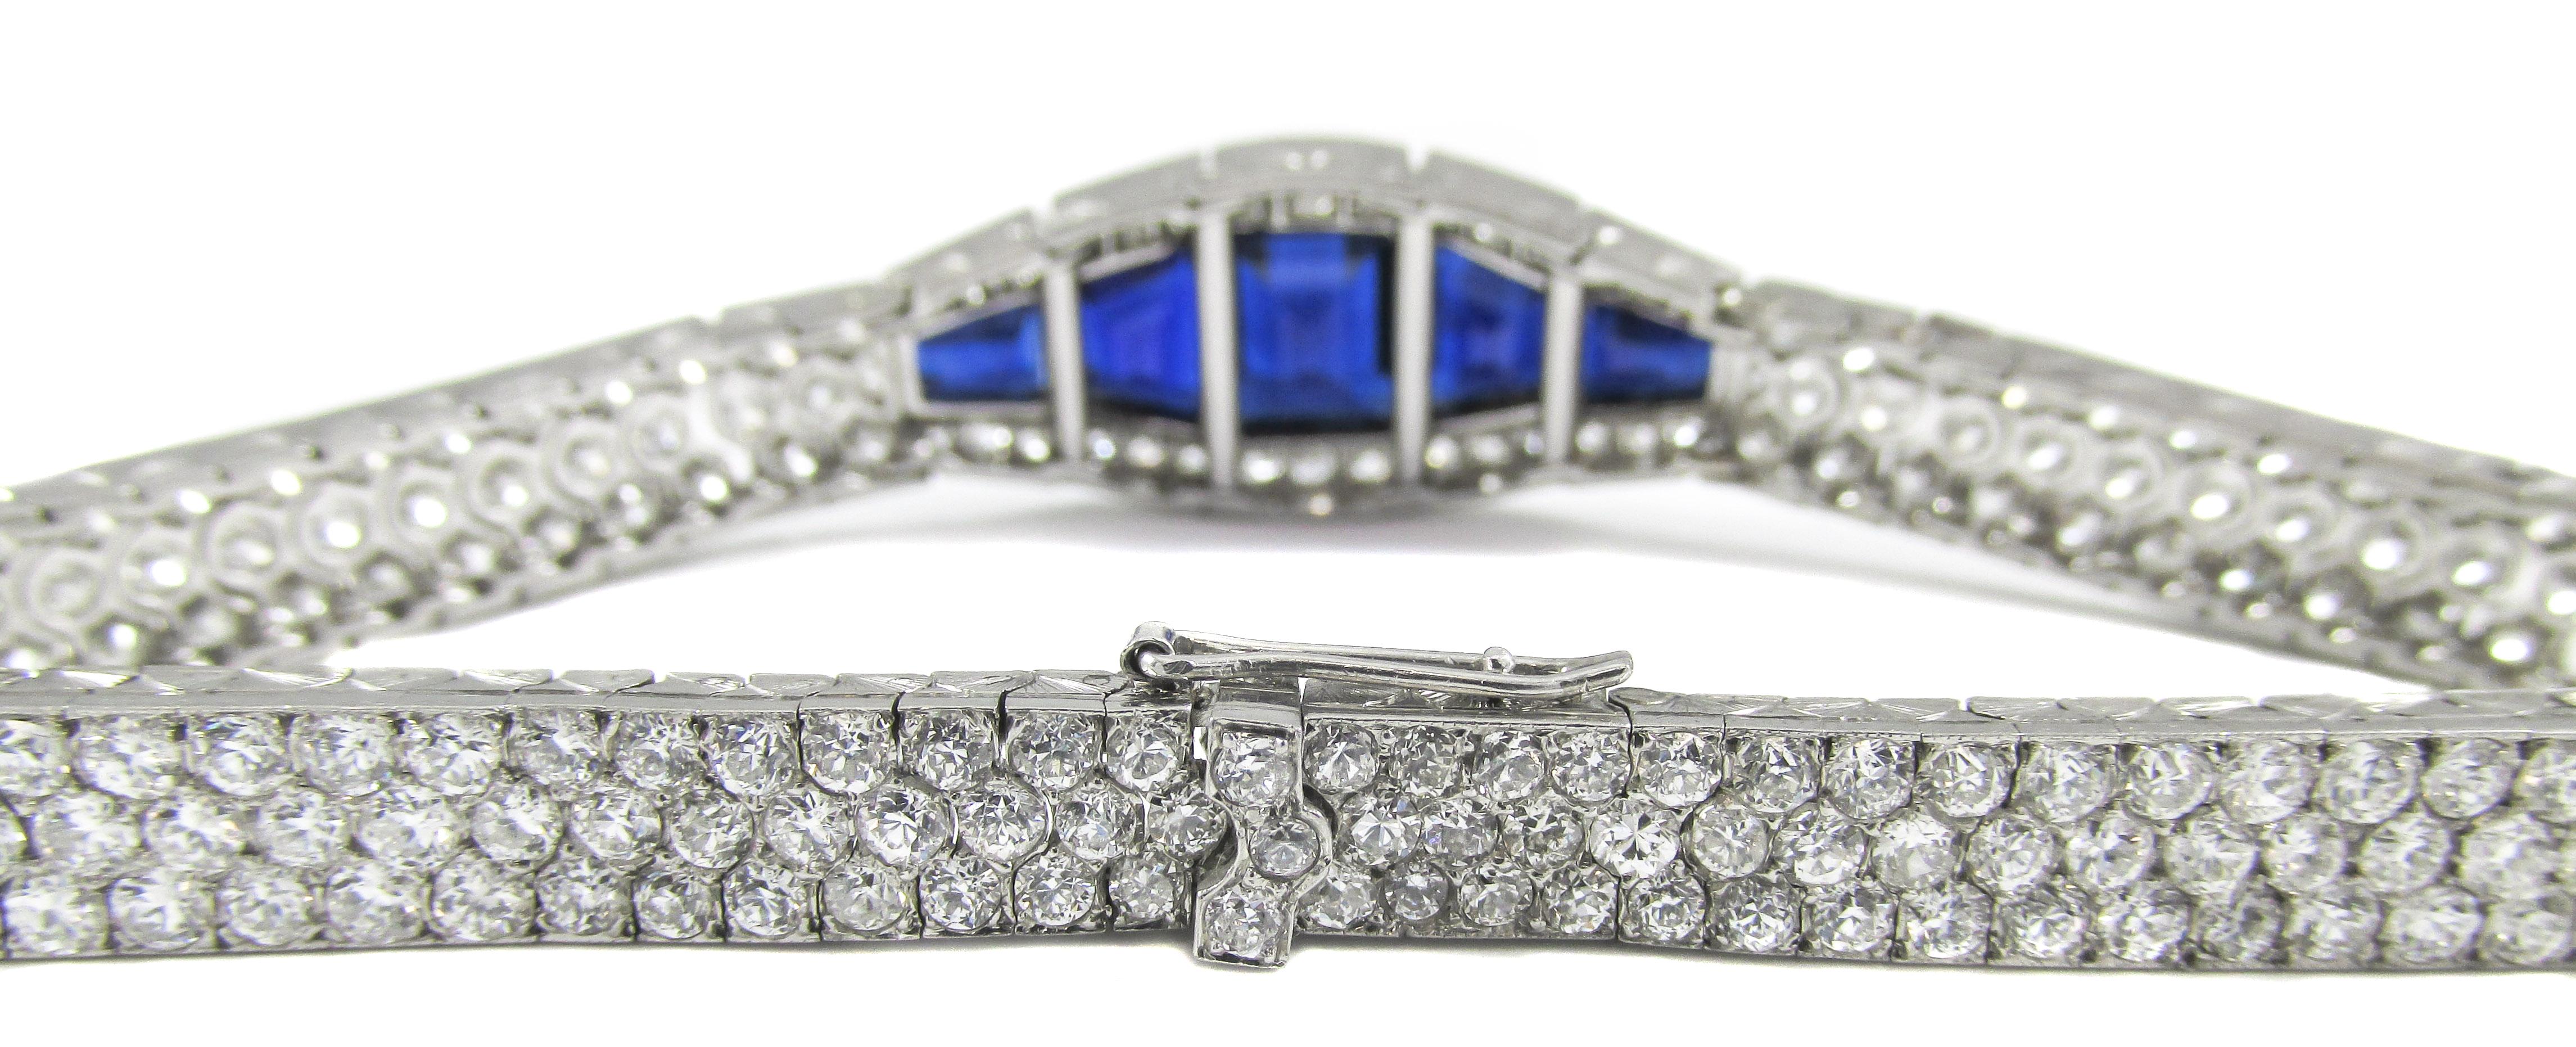 This exceptional Art Deco sapphire and diamond bracelet, which was hand crafted ca. 1925, is set with 218 prefectly matched Old European cut diamonds of the highest color and quality. The total diamond weight is approximately 15 carats. Each